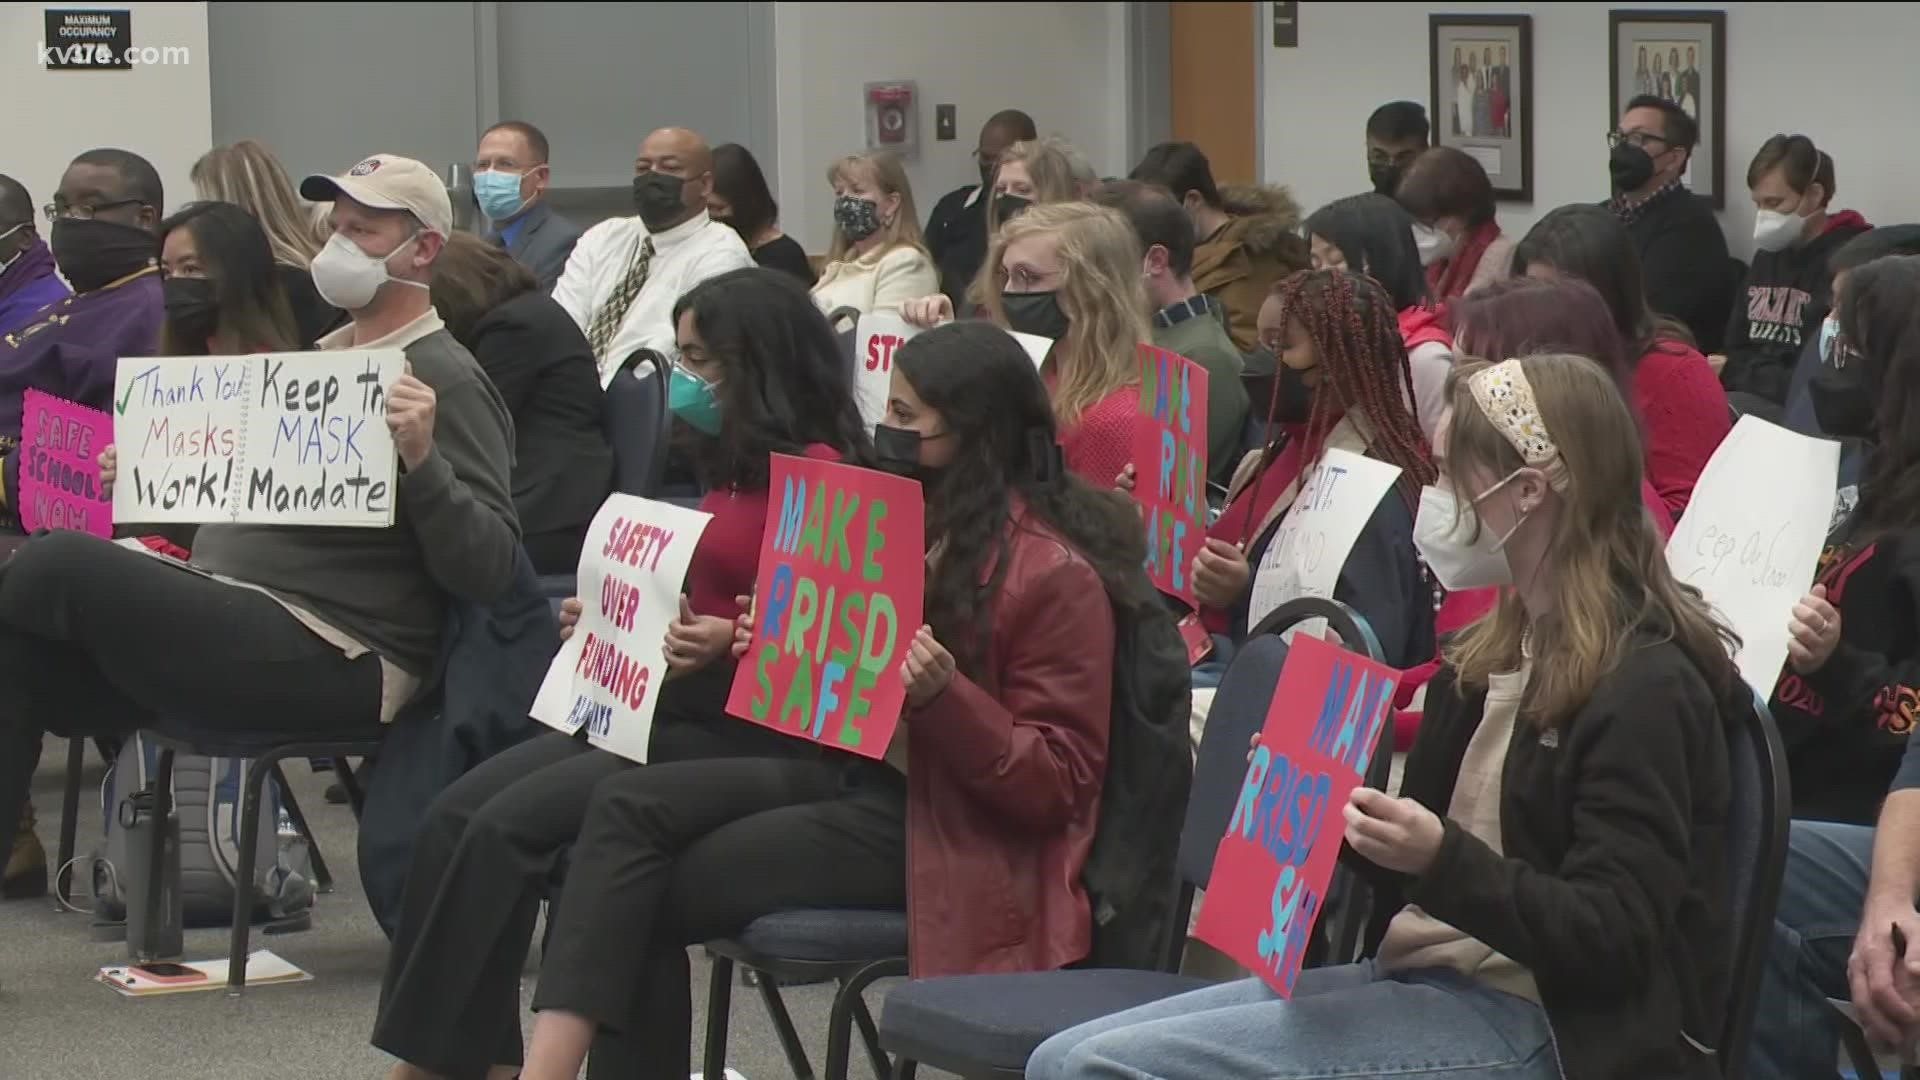 Students spoke at the meeting Thursday night after staging a walkout earlier in response to the district's COVID-19 health and safety rules.